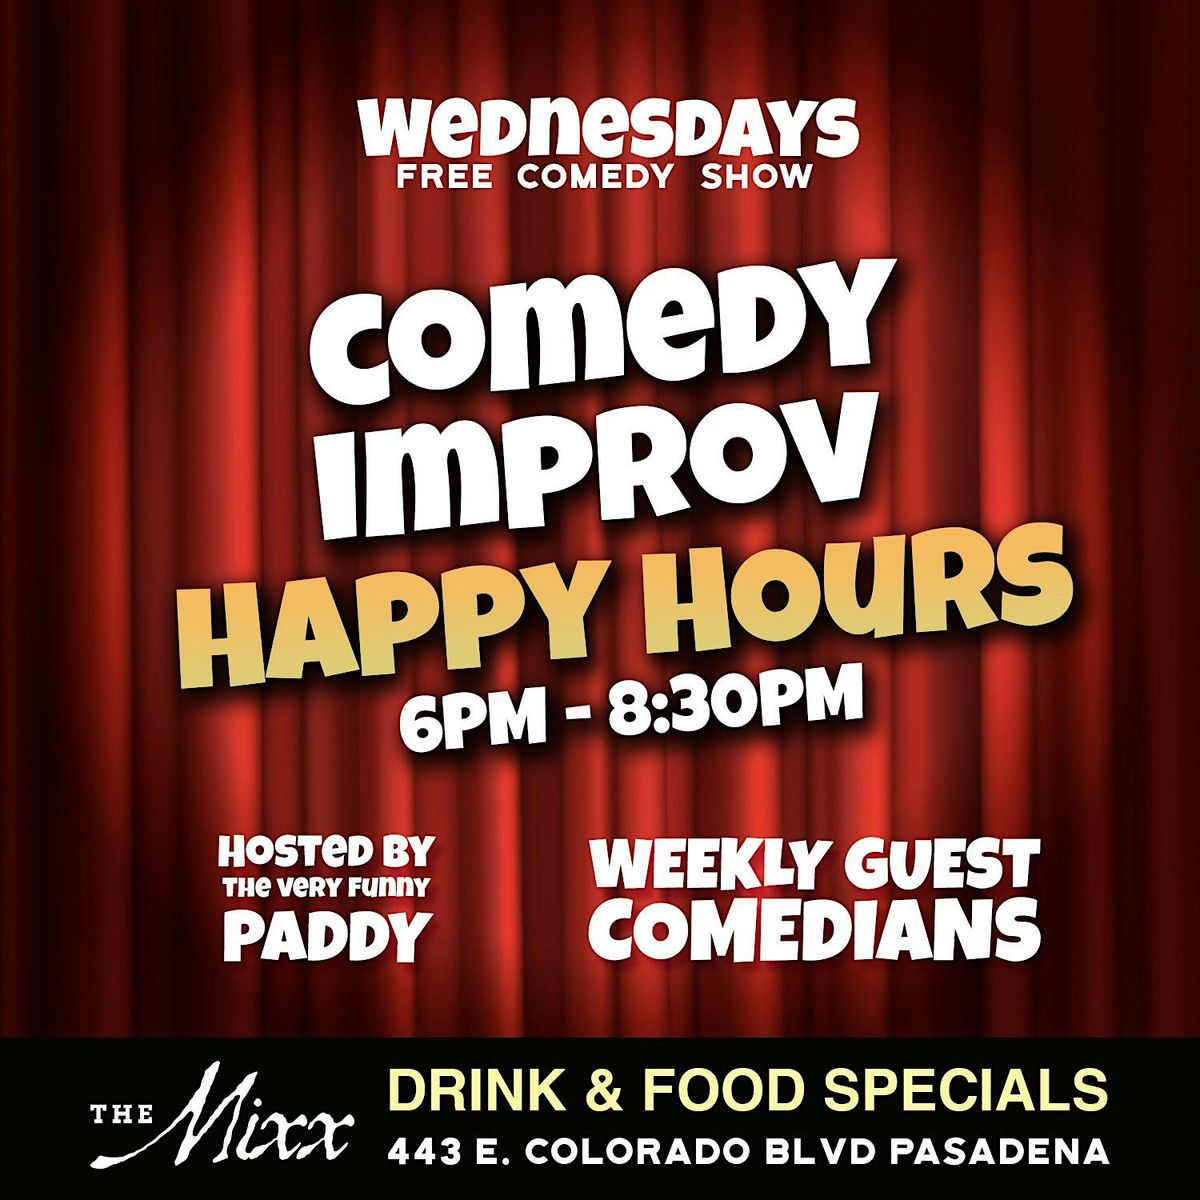 PASADENA'S FUNNIEST FREE COMEDY IMPROV AND HAPPY HOURS